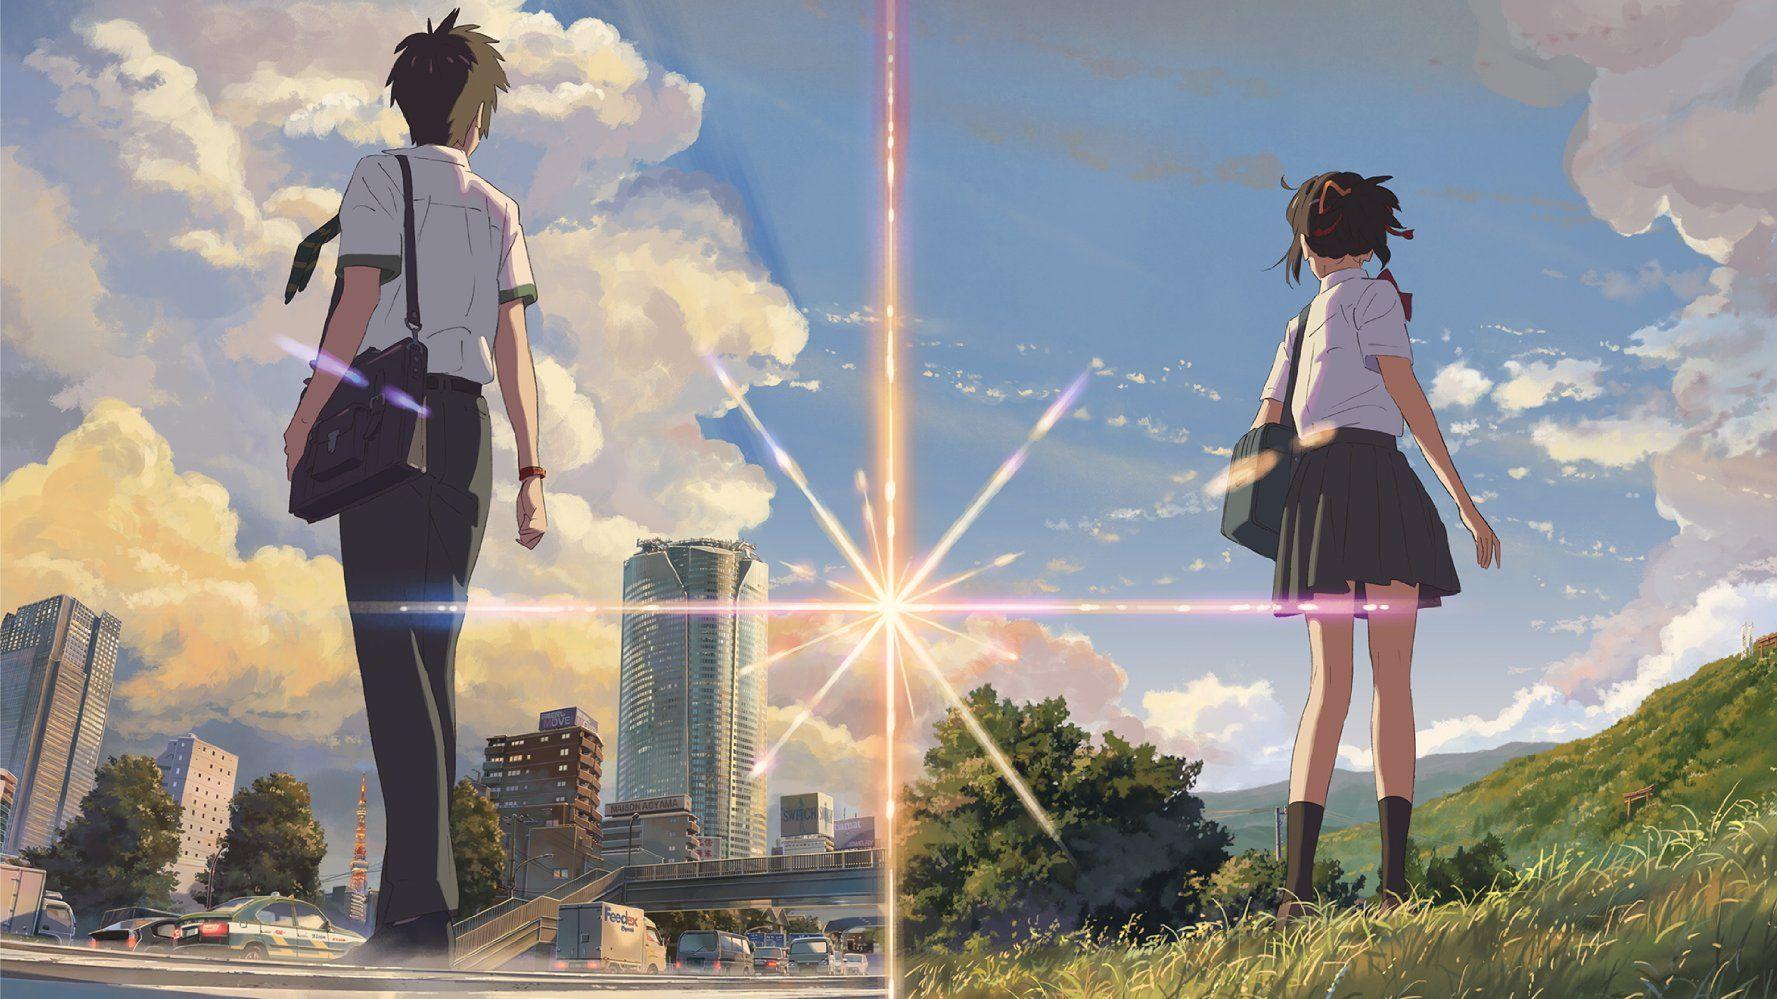 Your Name Review: Timeless Romance Transcends Tropes